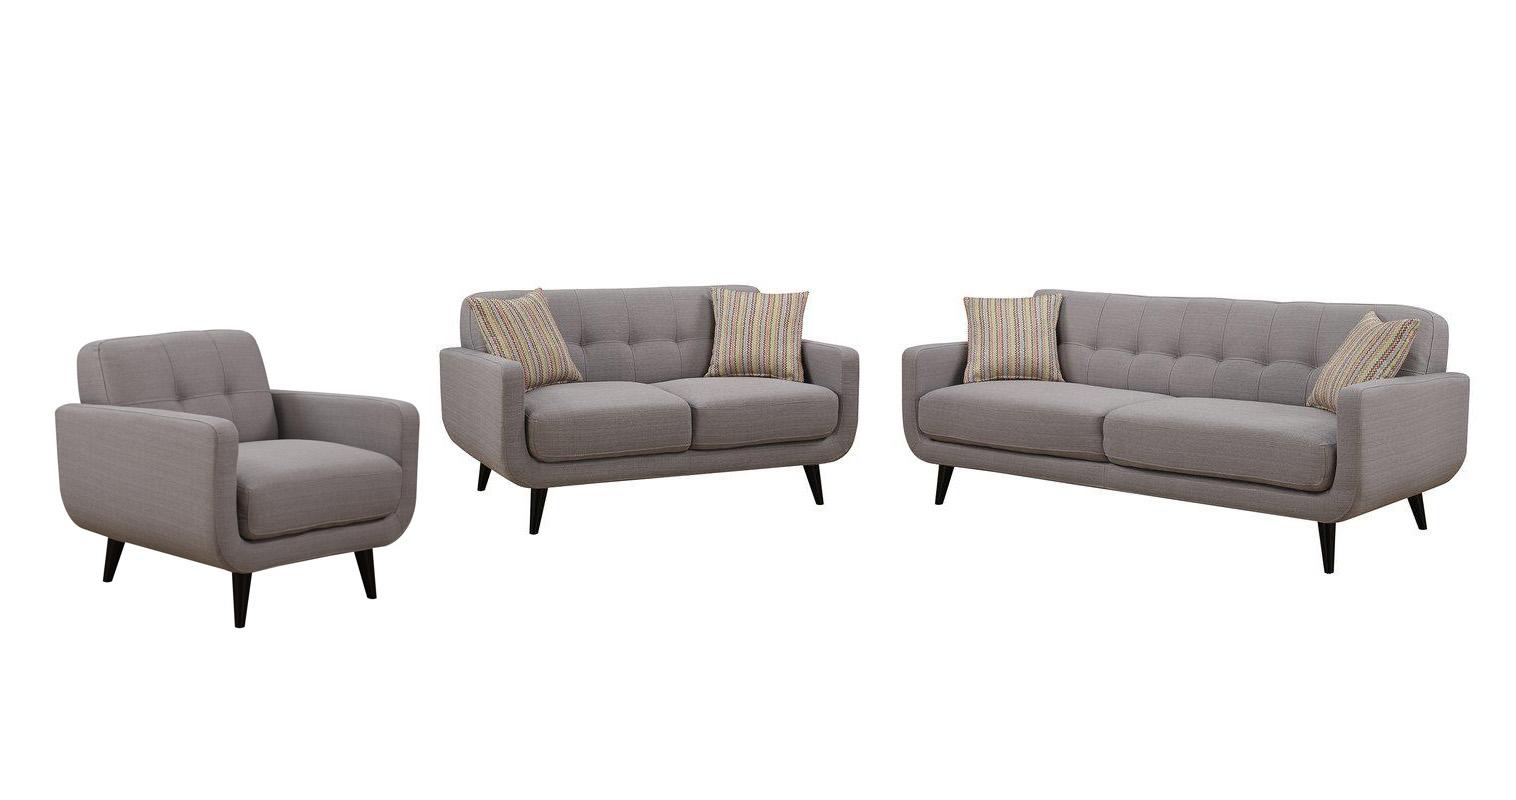 Contemporary Sofa Loveseat and Chair Set Crystal CRYSTAL-GREY-3PC-SET in Gray Fabric